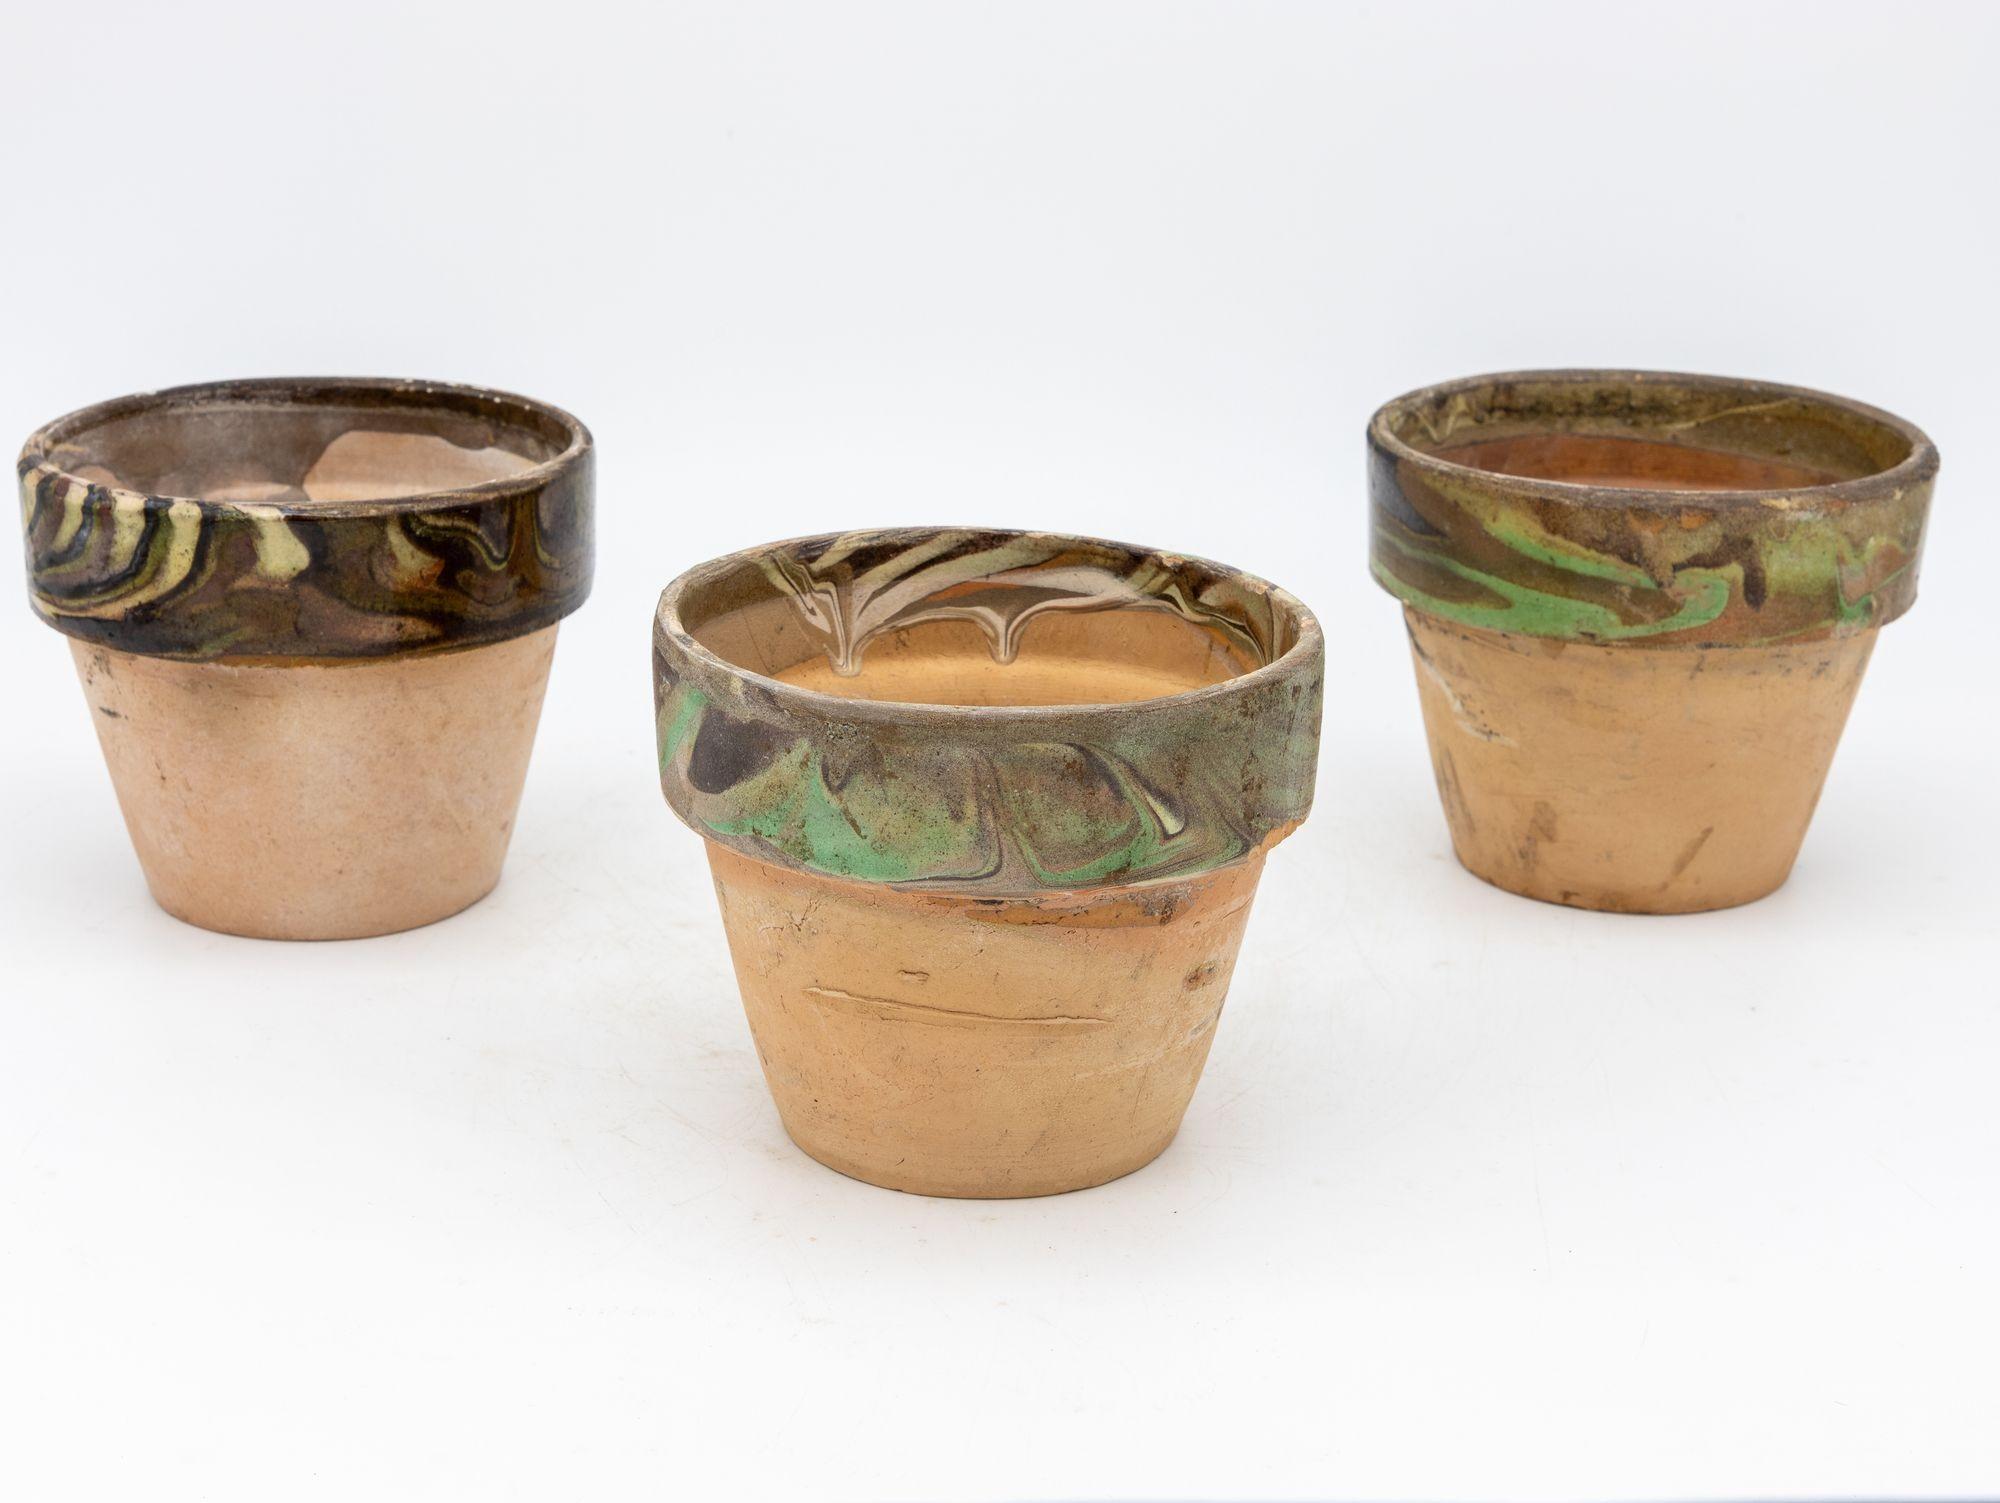 This set of three marbled-rim flower pots is perfect for adding a touch of elegance and sophistication to your indoor or outdoor decor. These pots are made of terracotta and feature a beautiful marbled rim design that is sure to catch the eye. Each